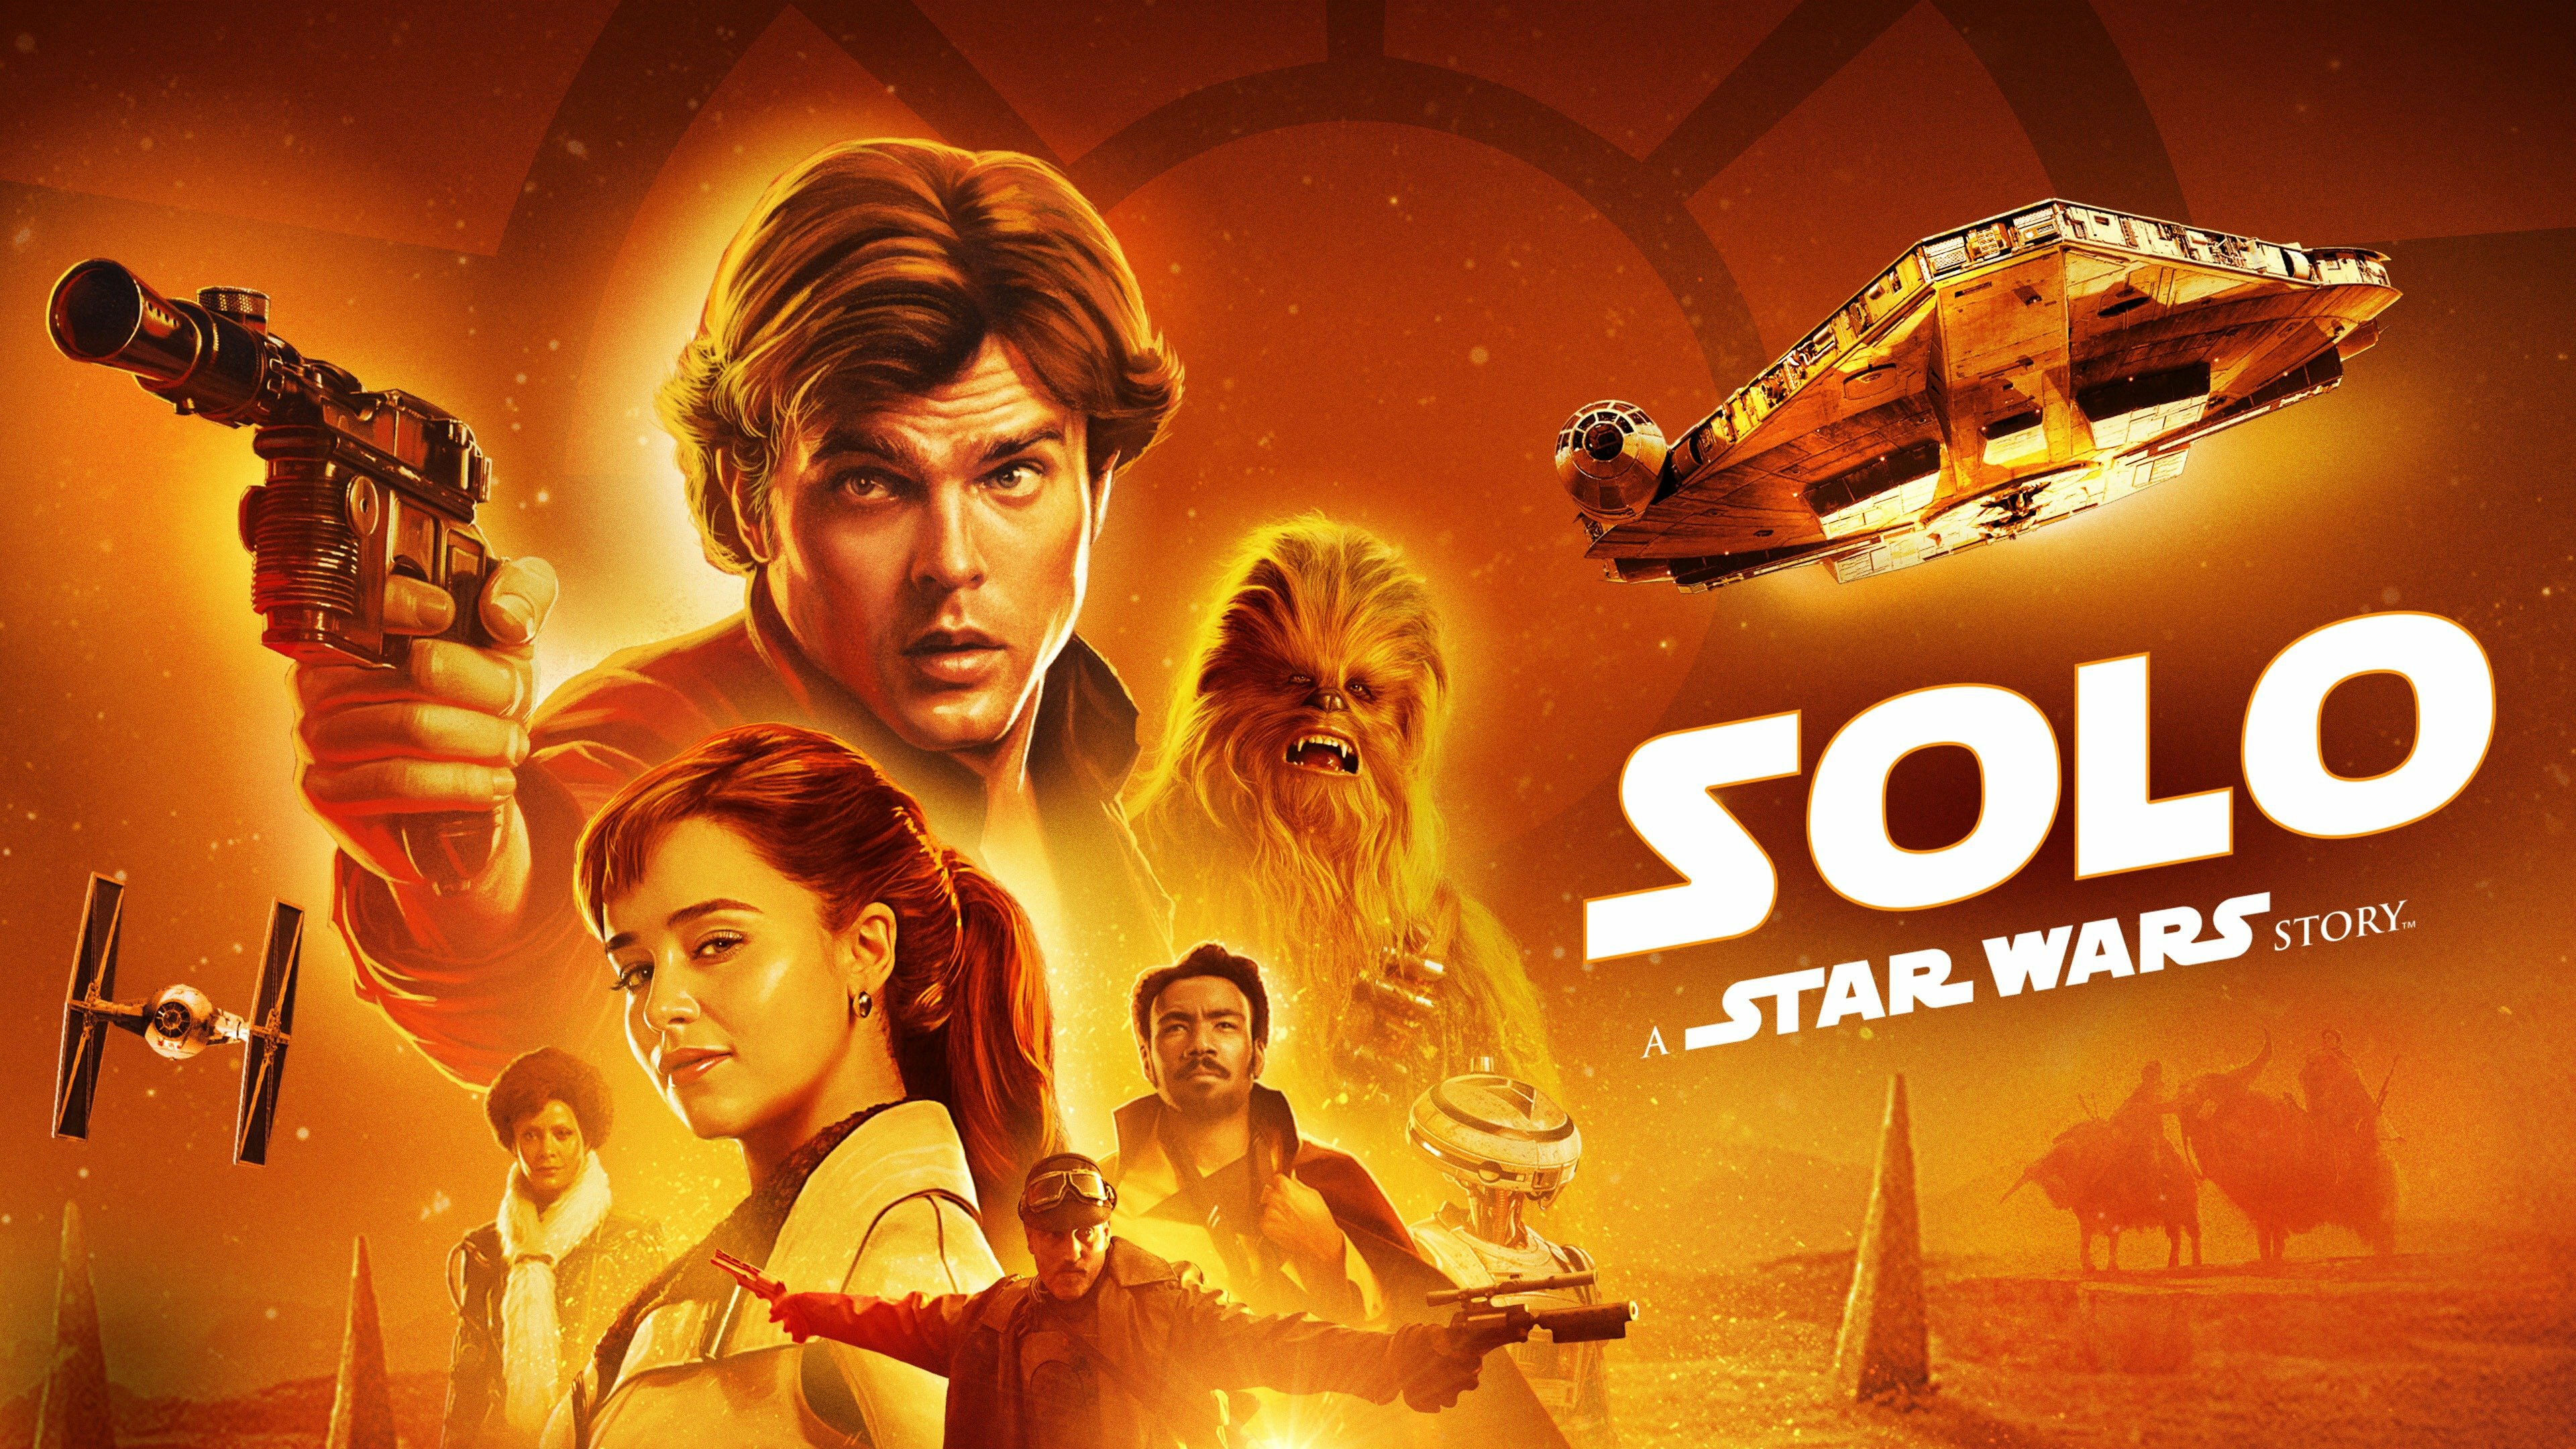 The Ultimate Guides to Star Wars: The Last Jedi and Solo: A Star Wars Story